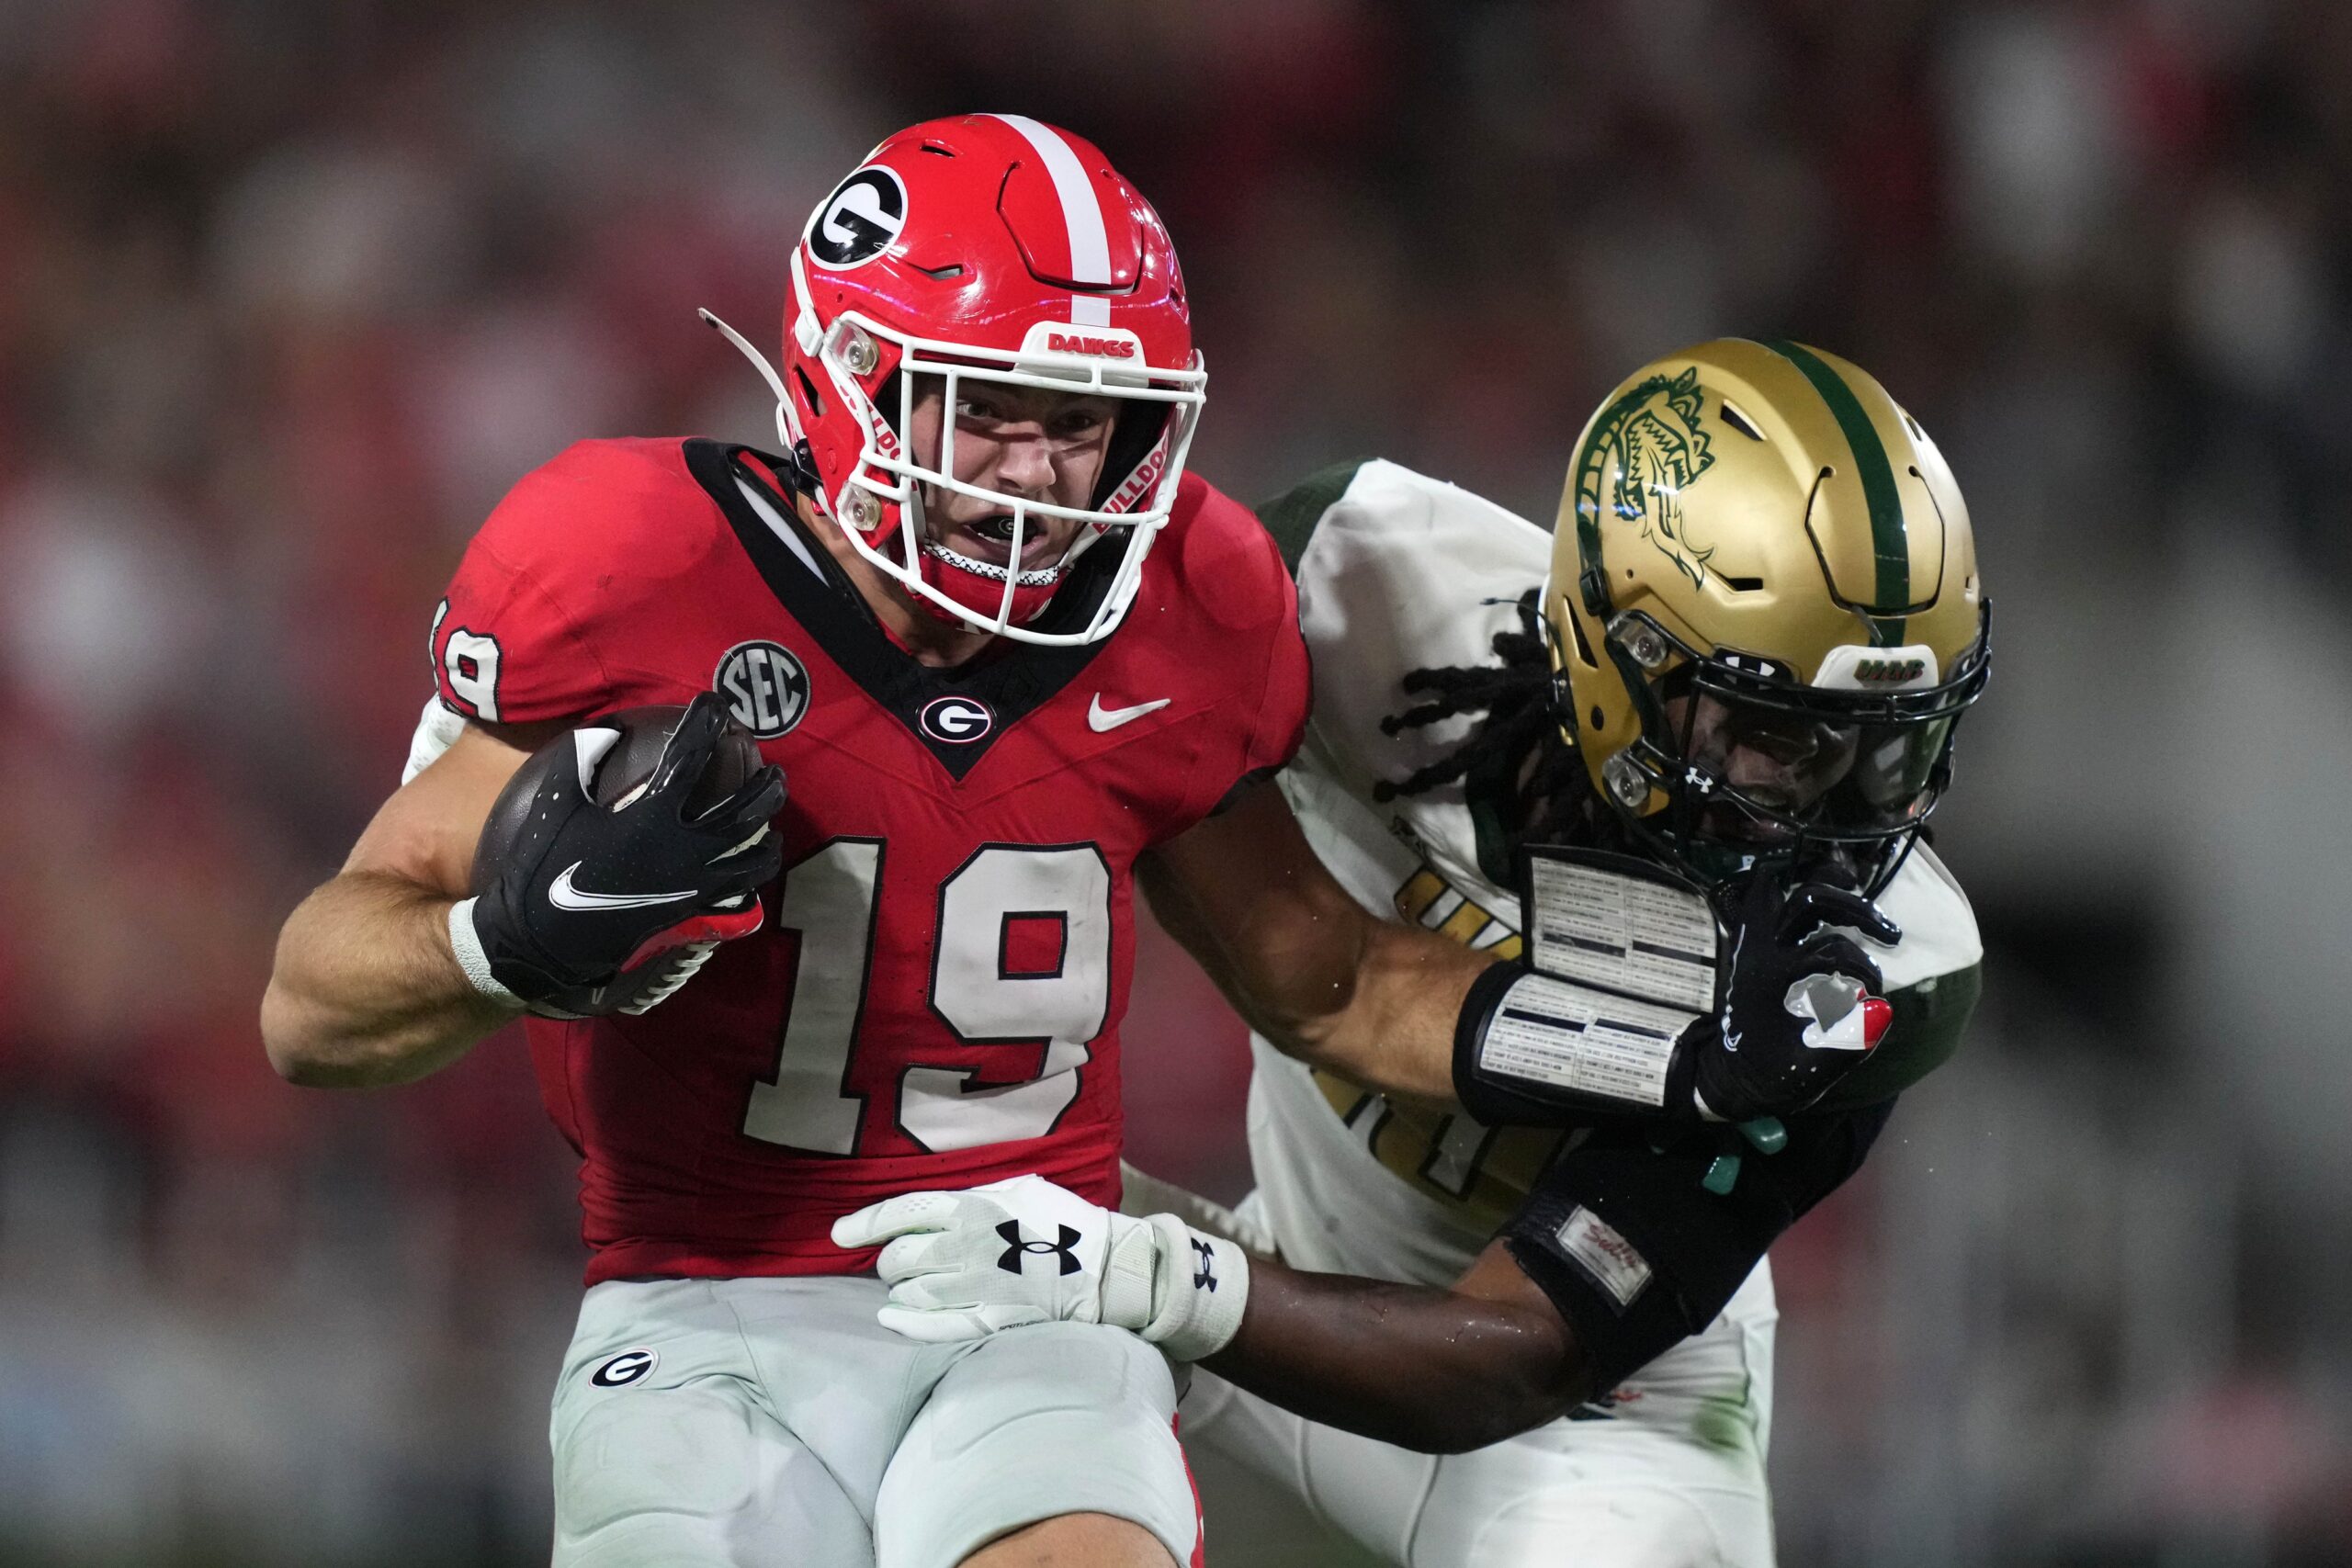 Georgia Bulldogs tight end Brock Bowers (19) scores on a 41-yard touchdown reception against against UAB Blazers linebacker Nikia Eason (10) in the first half at Sanford Stadium. Mandatory Credit: Kirby Lee-USA TODAY Sports